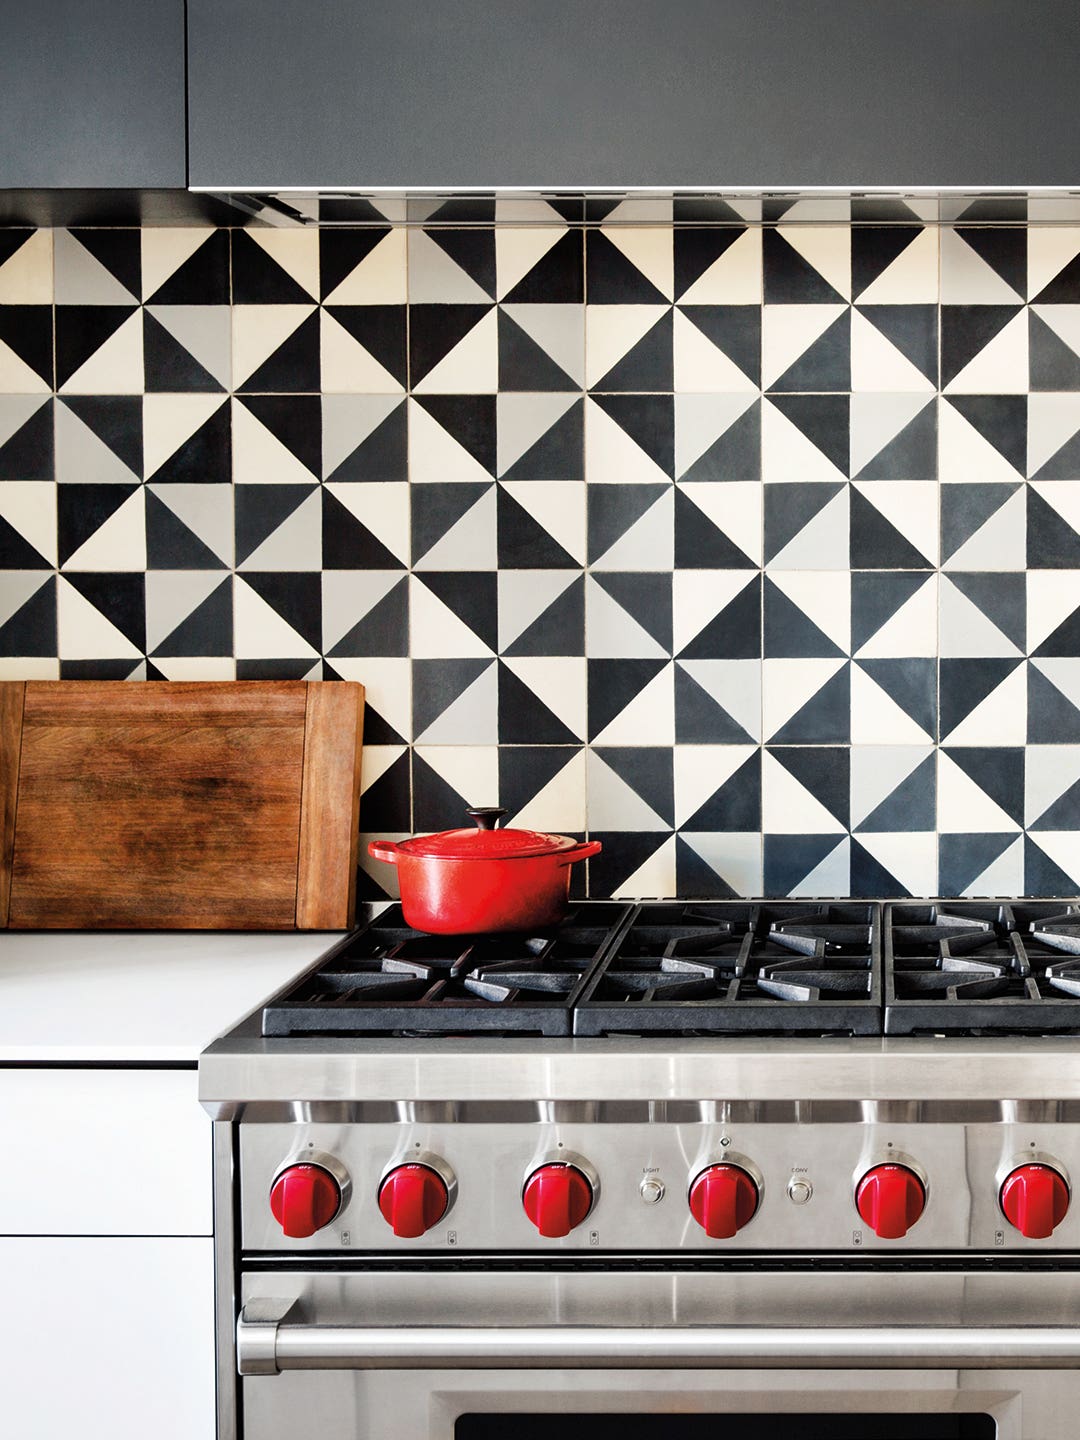 Black and white kitchen backsplash with red Dutch oven on stovetop